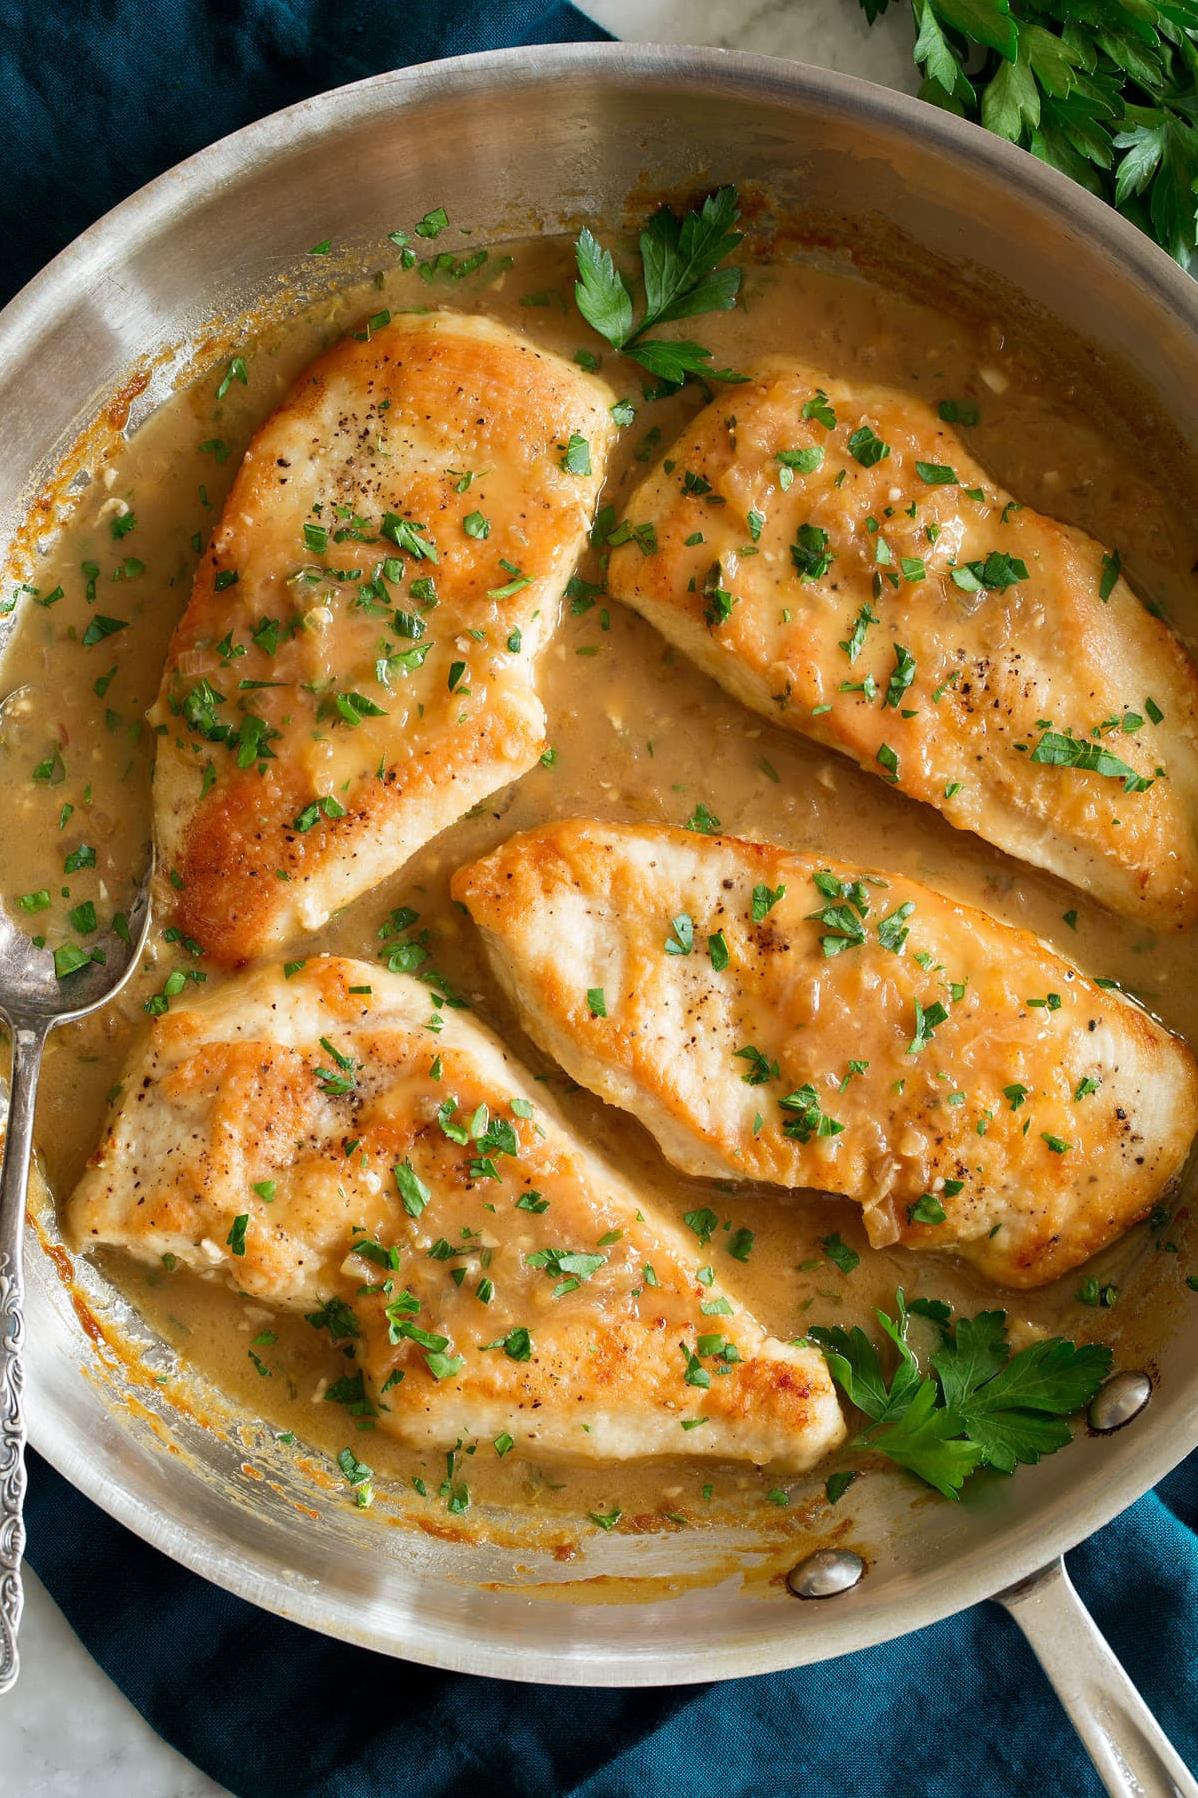  Tender, juicy chicken paired with a buttery white wine sauce